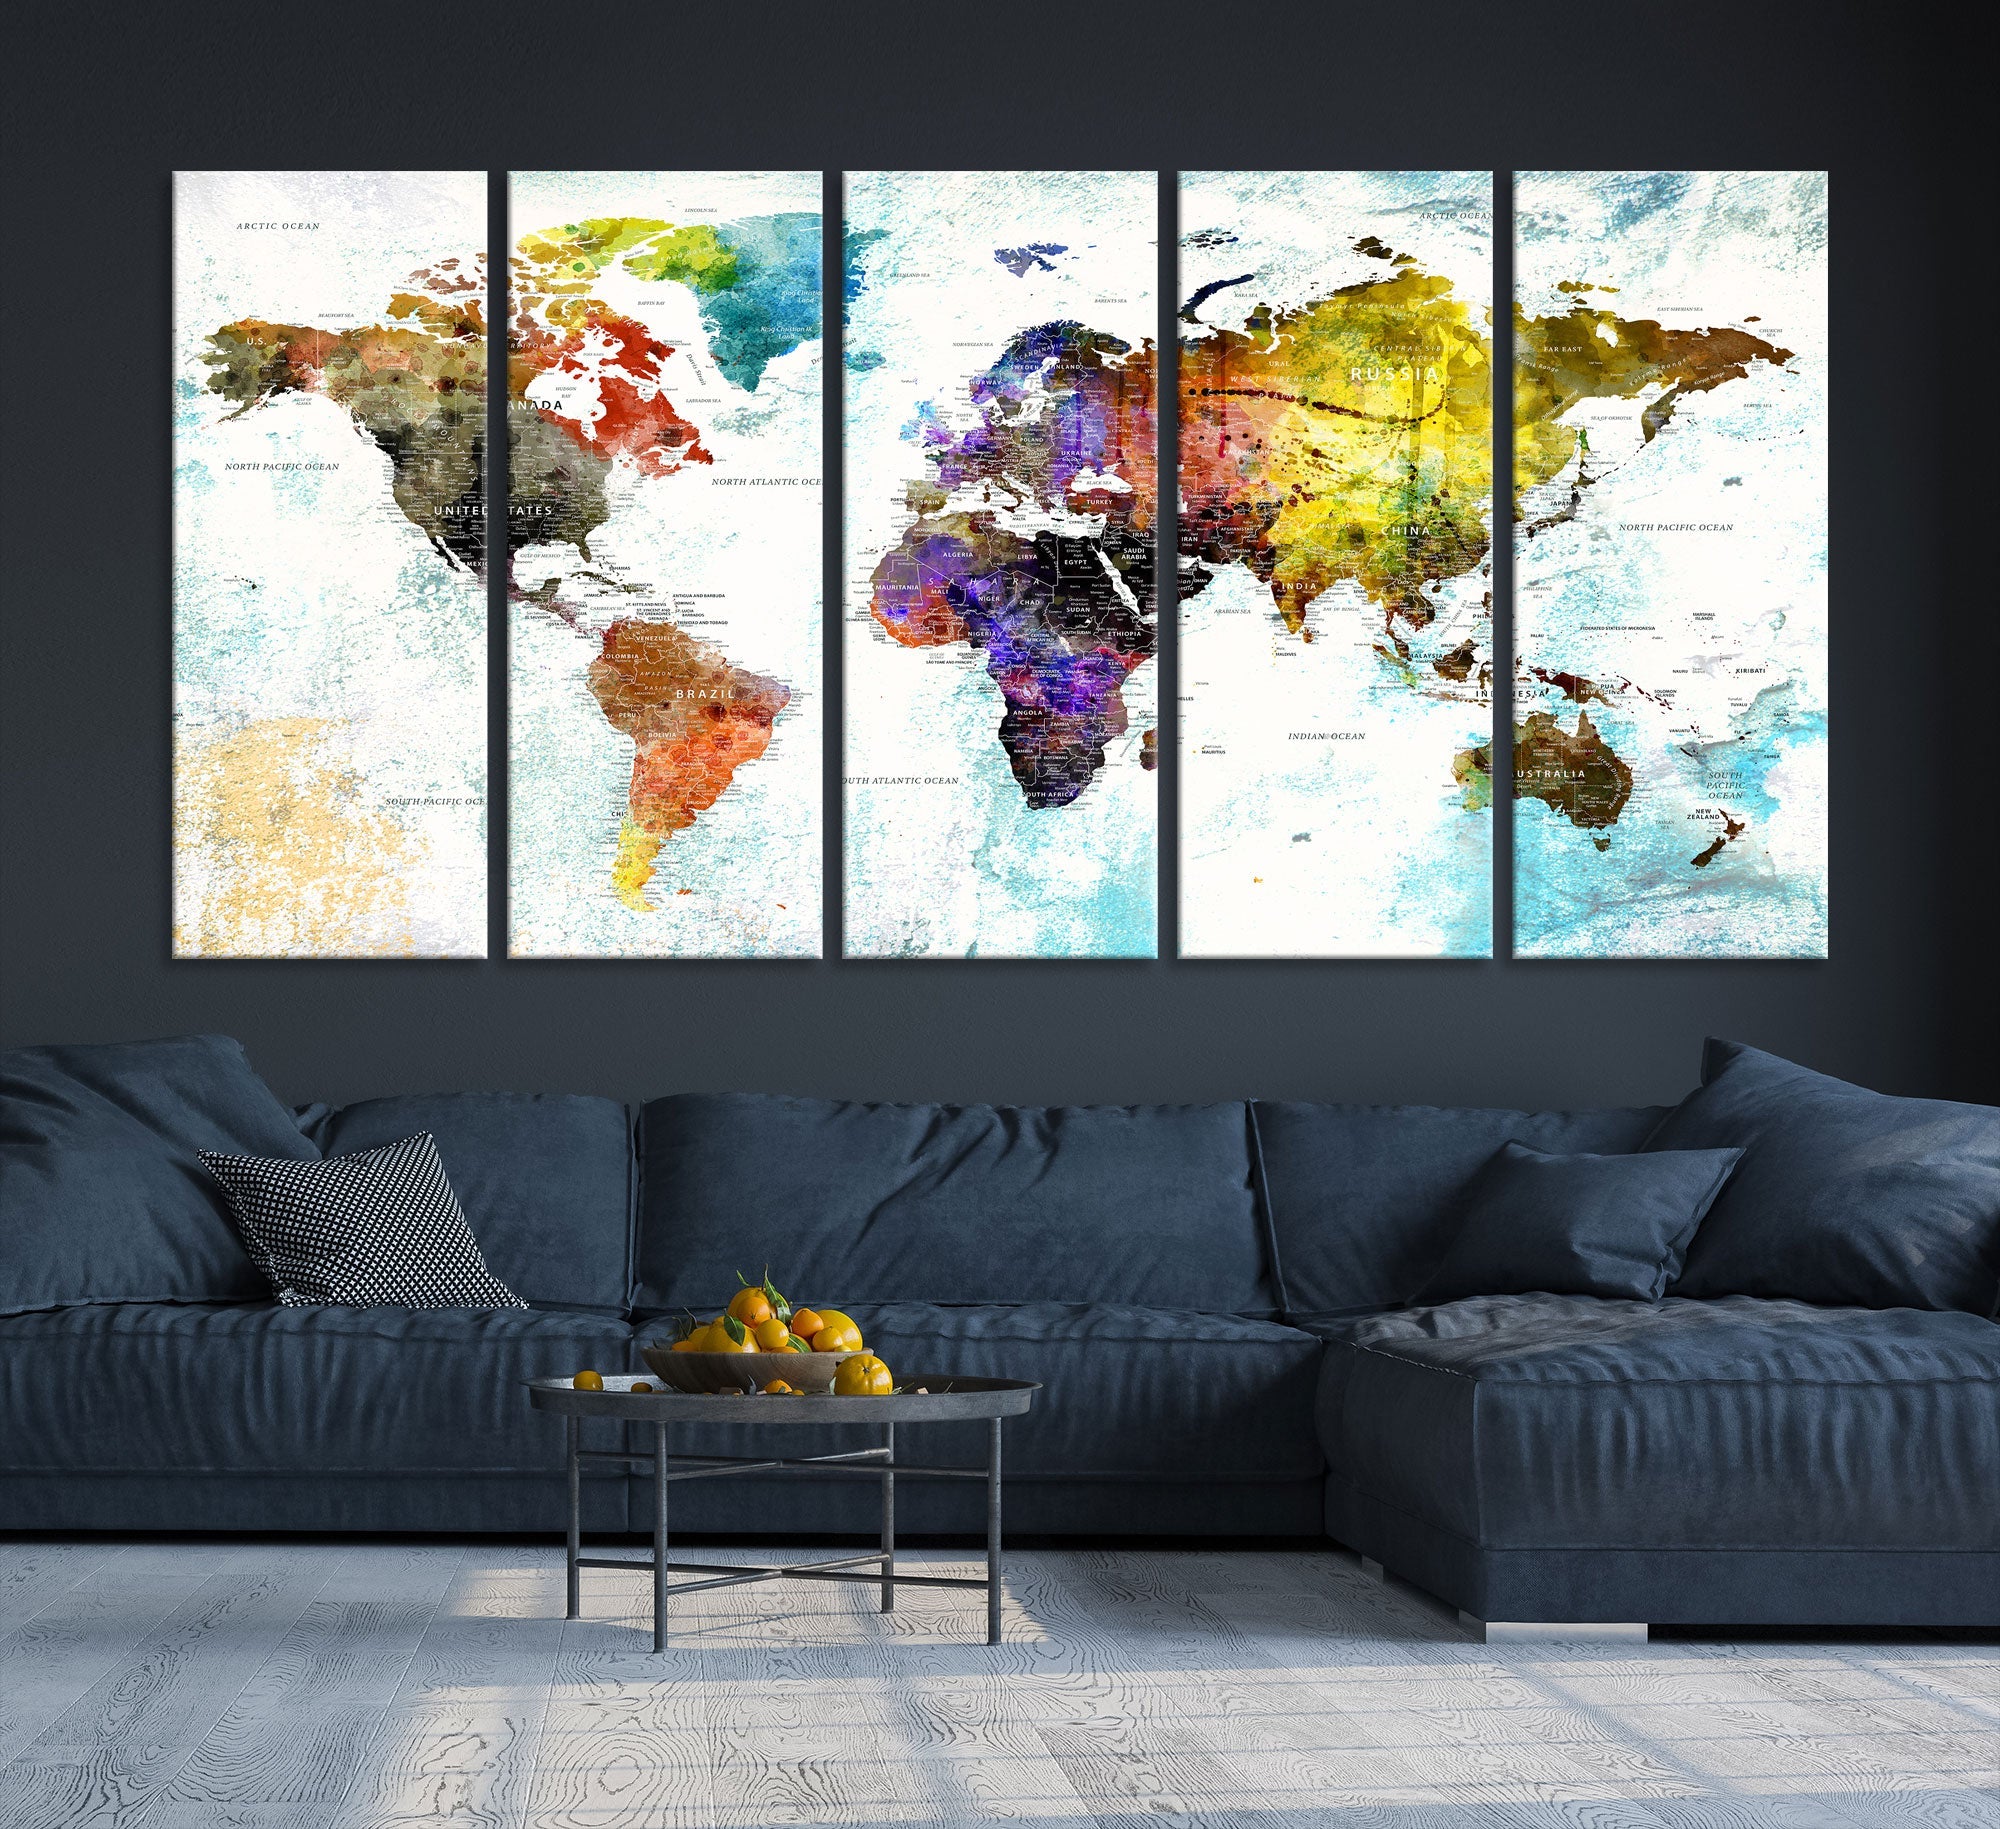 Watercolor Colorful World Map Wall Art Canvas Print Large Giclee Printing Home Decor